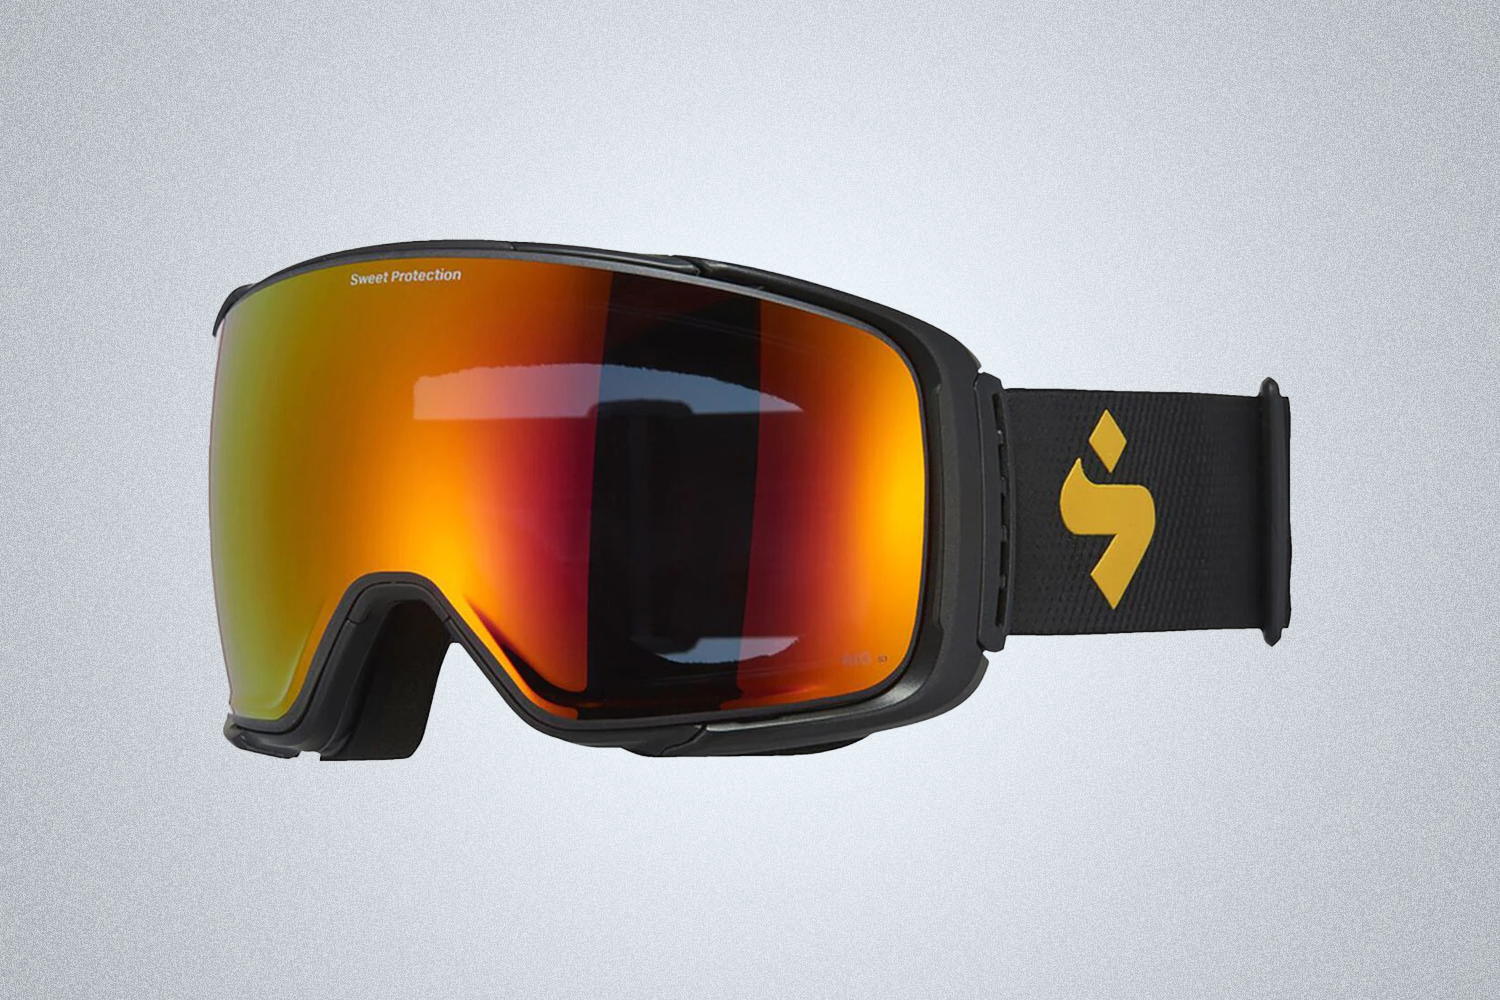 The Sweet Protection Interstellar RIG Goggles are the best ski and snowboard goggles for all-mountain winter sports in 2022